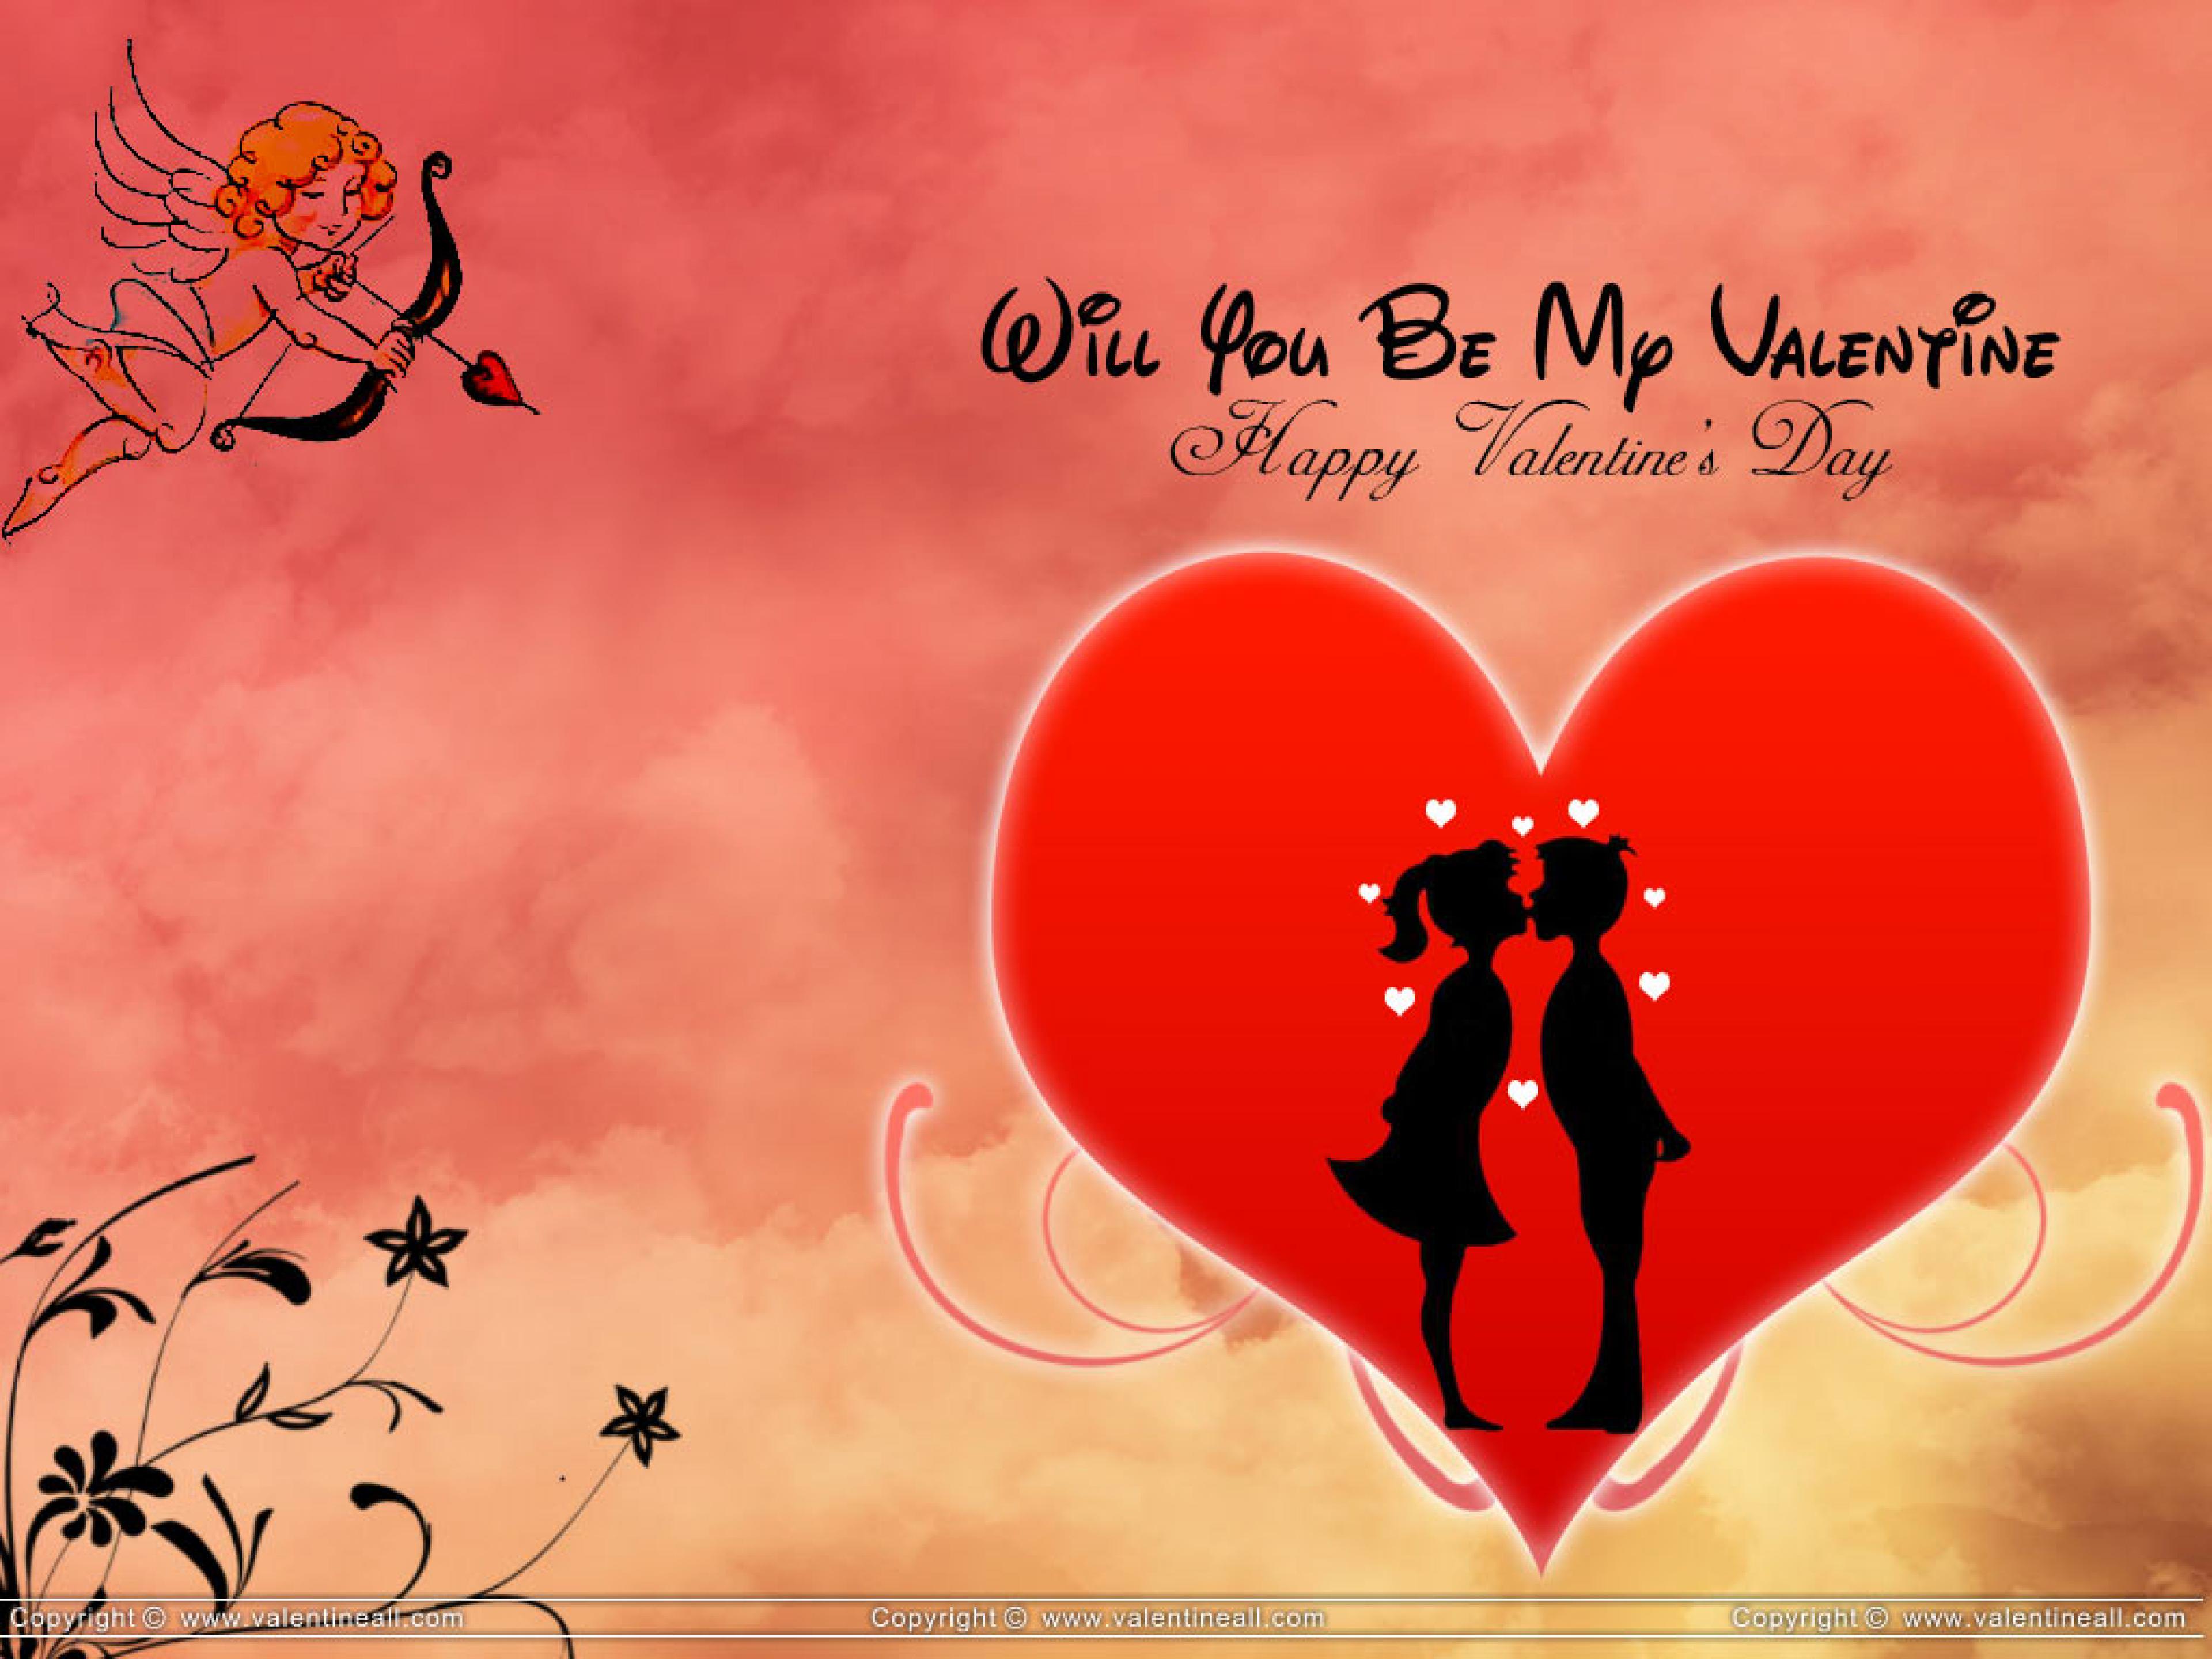 Heart Kiss Background Wallpaper You Be My Valentine